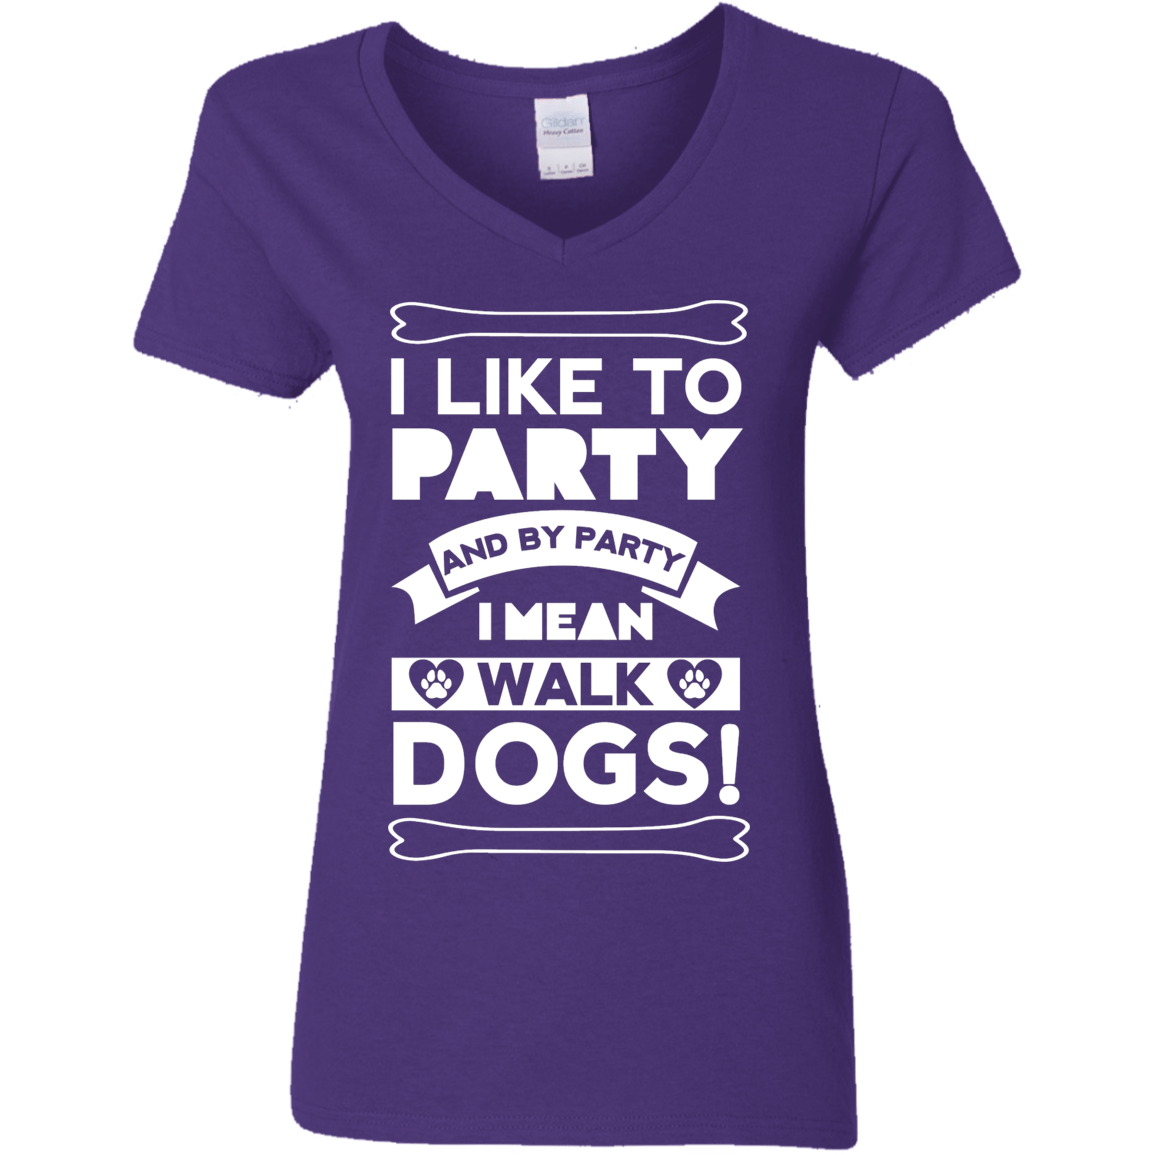 I Like To Party Dogs - Ladies V Neck.